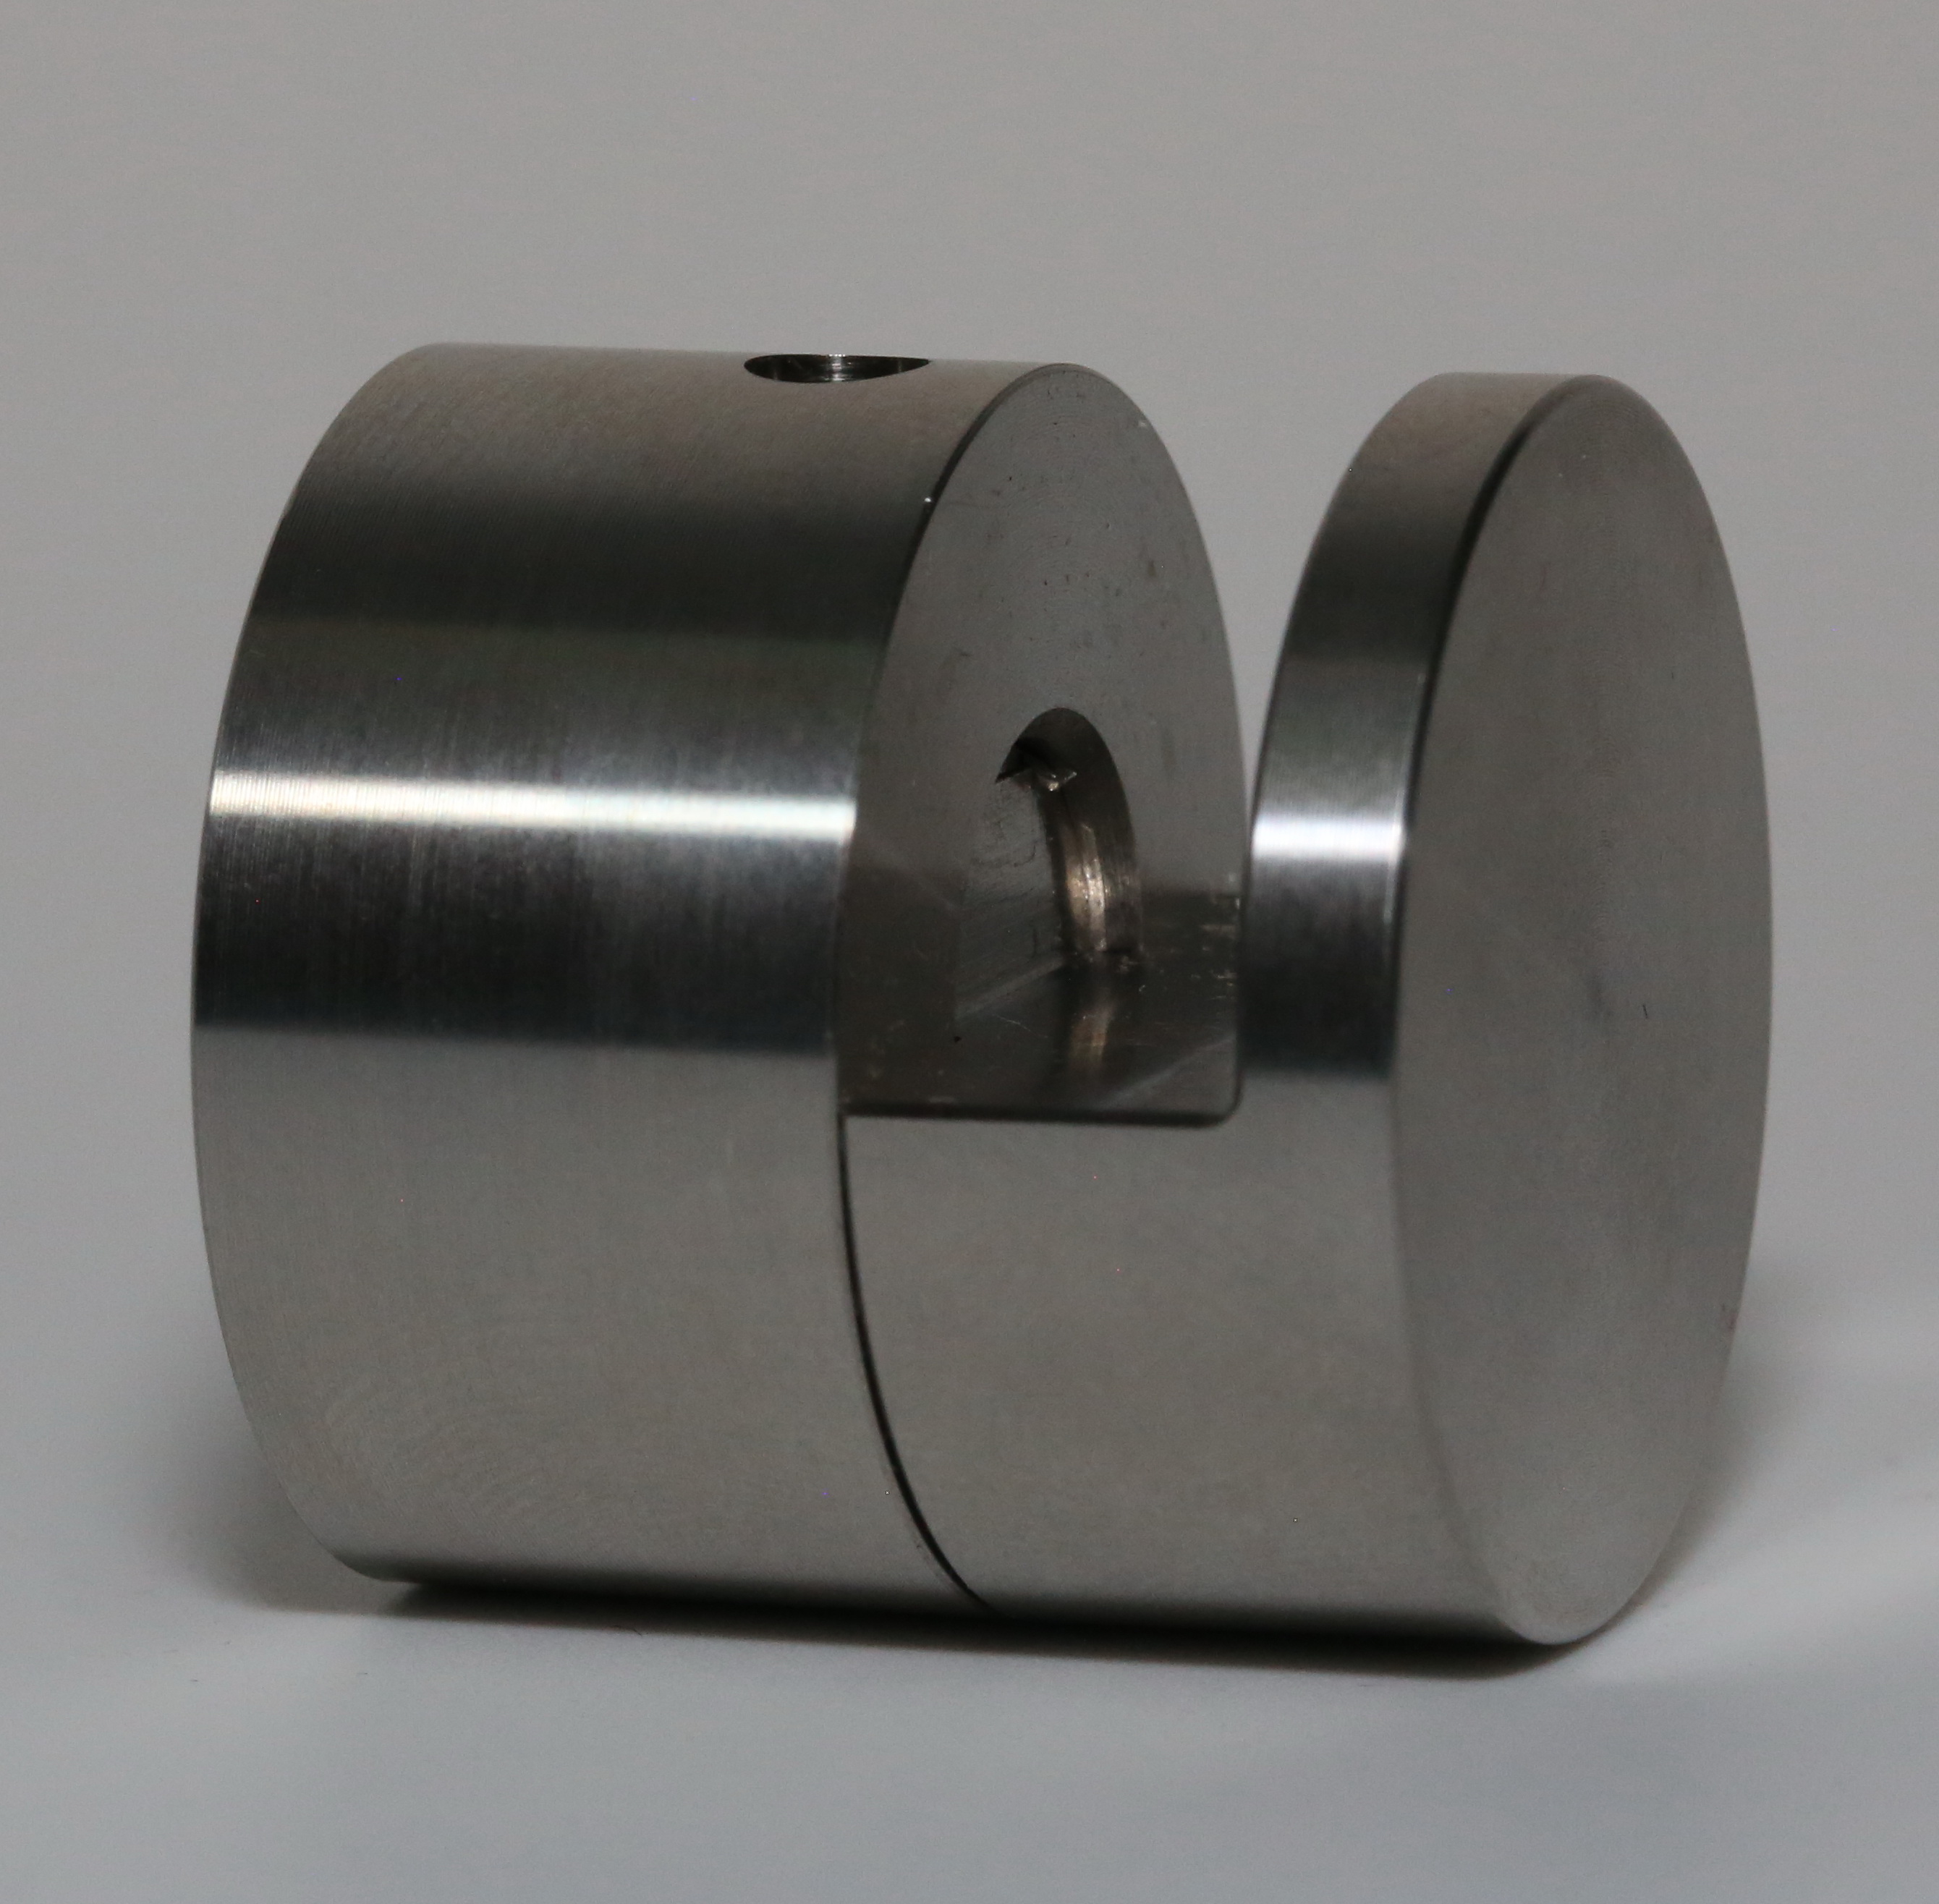 Stainless steel distance holder with clamp for 8mm glass